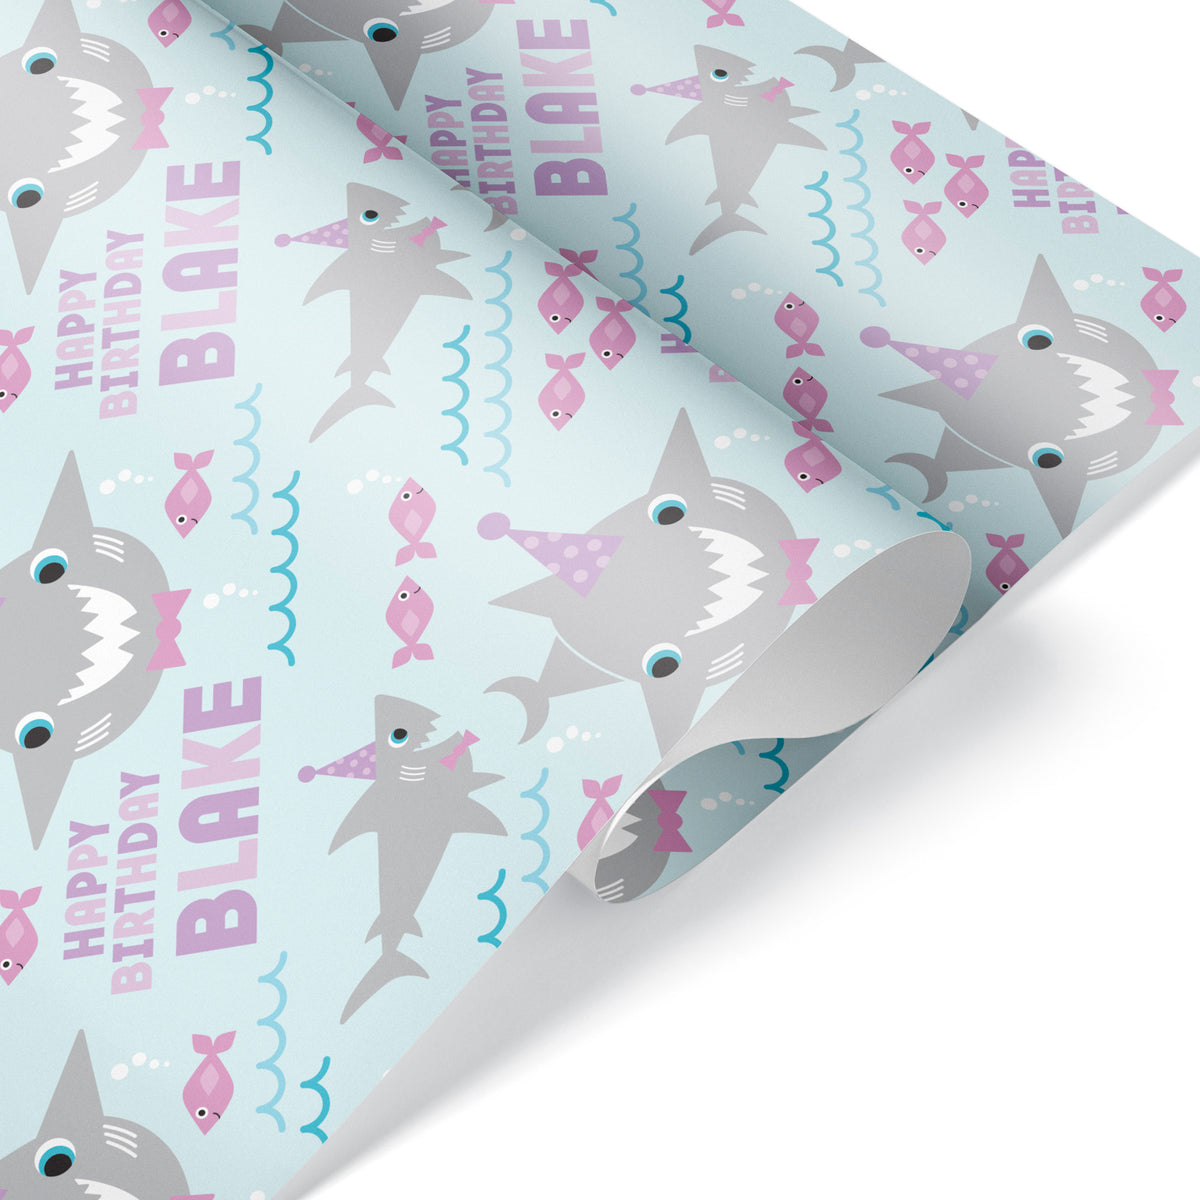 Shark Birthday Personalized Wrapping Paper - ROSE